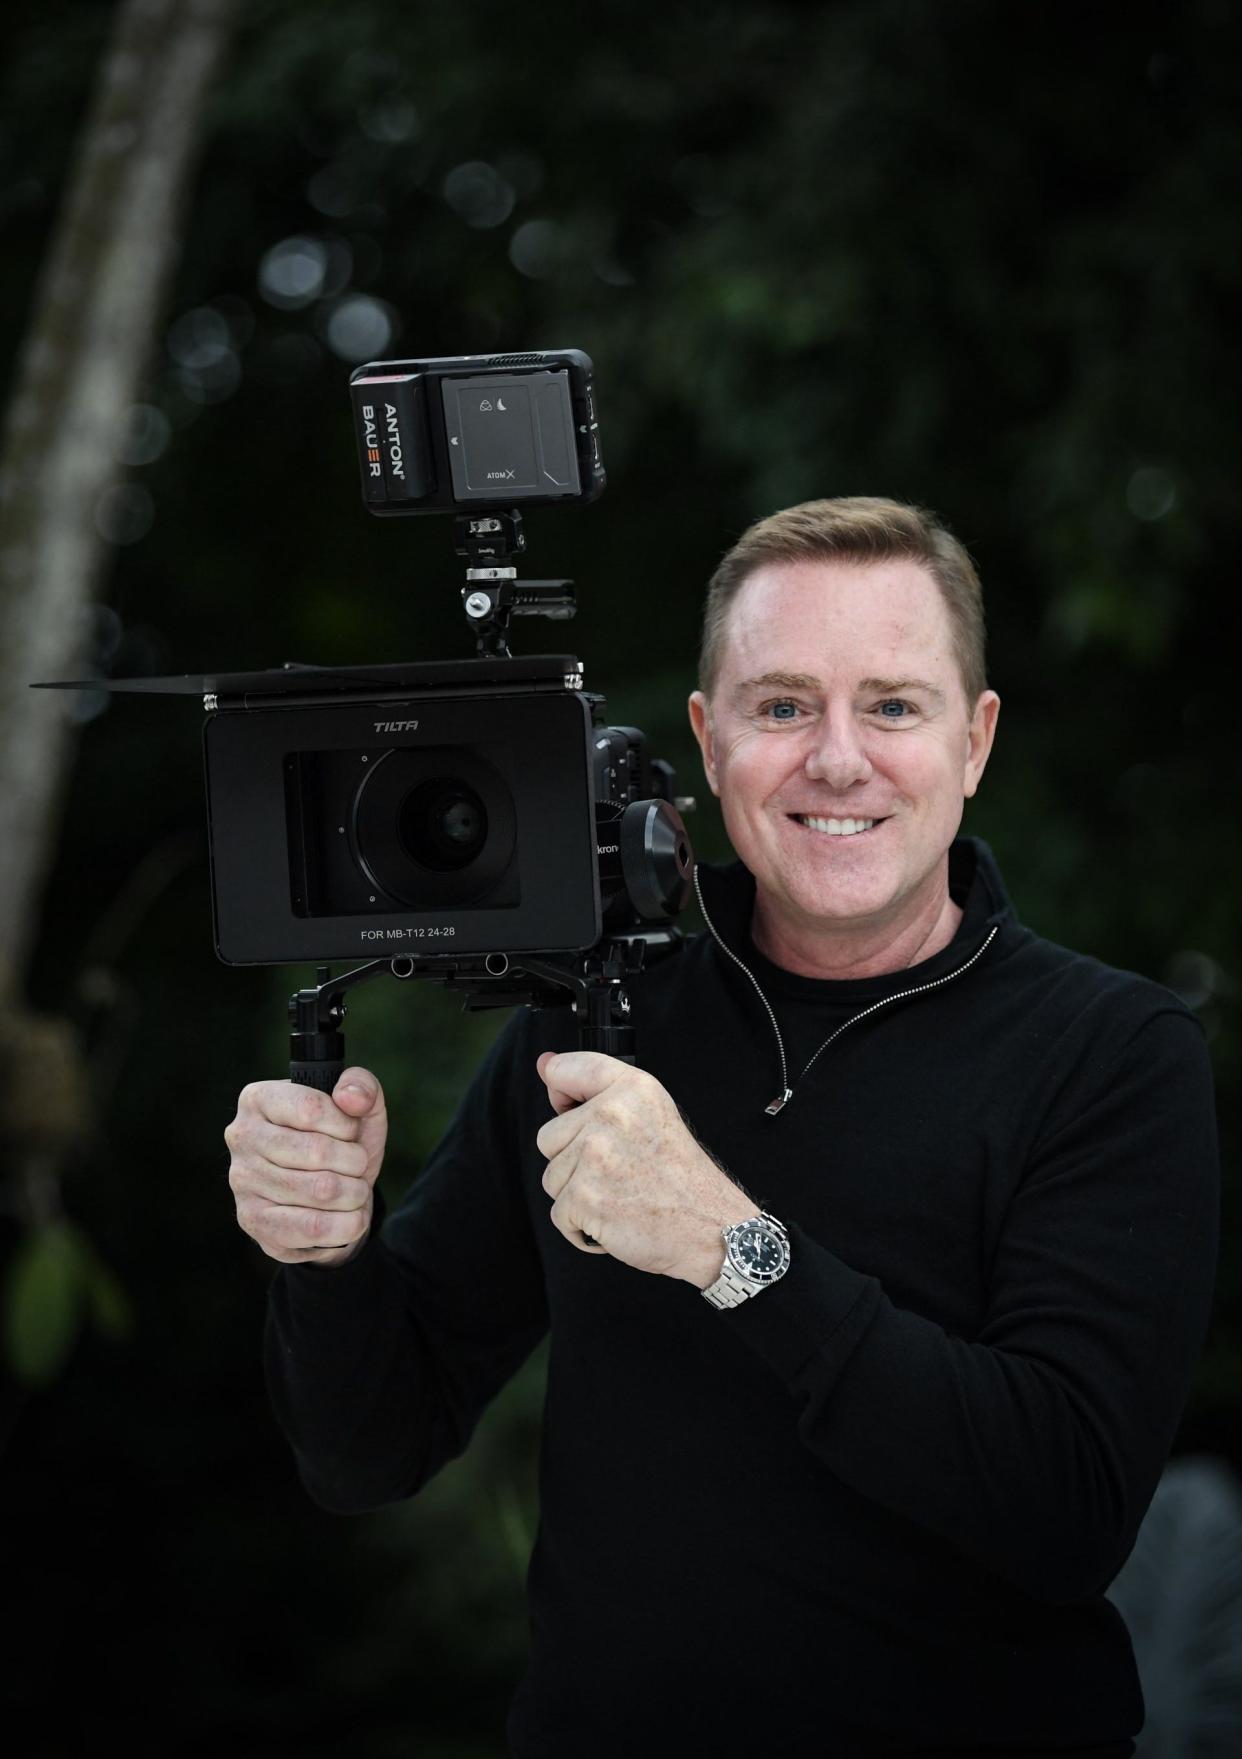 Ron Davis lives in Wellington. Better known for his documentary films, he has expanded his enterprise to create the ultimate luxury gift: a documentary starring you or a loved one. This gig helps cover the significant costs of his first love, making documentary films.